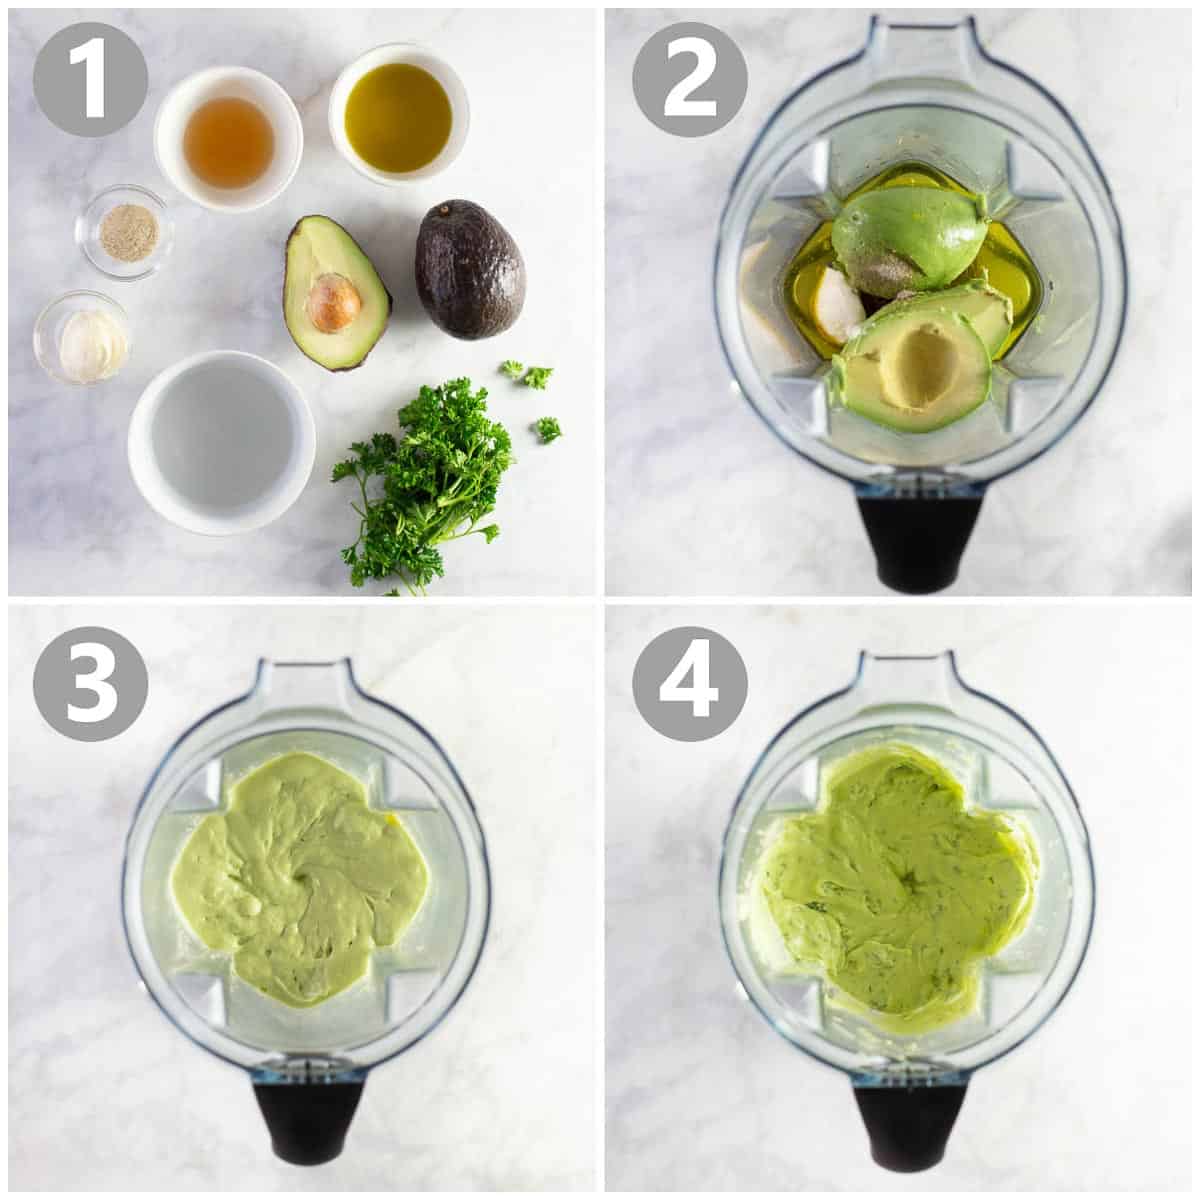 Ingredients for the dressing and how to blend it in a food processor